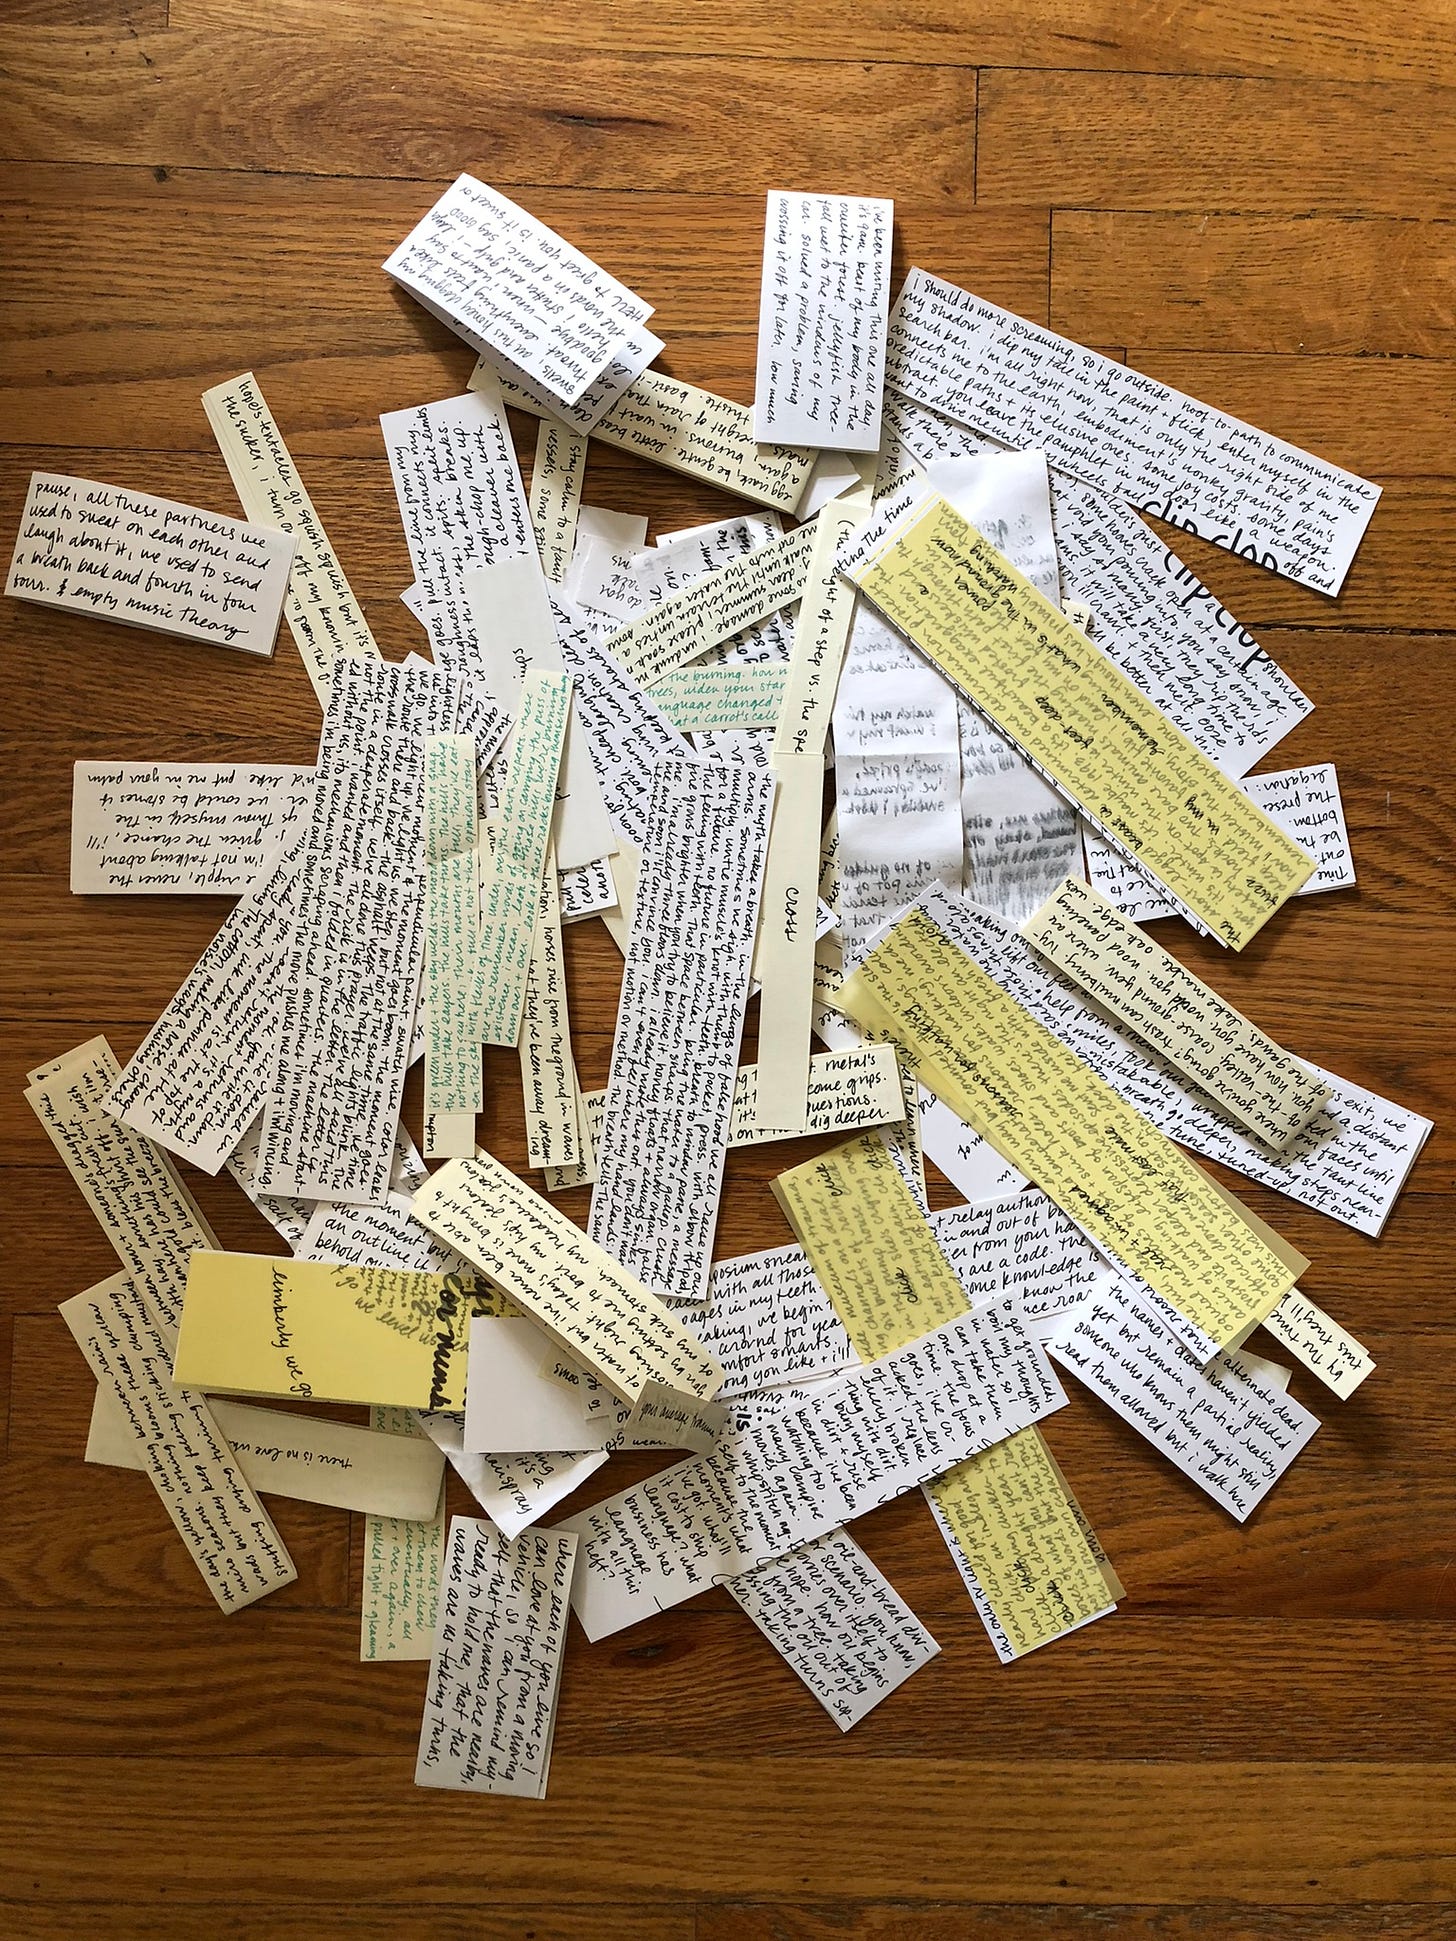 a pile of various sizes, shapes, and colors of handwritten ink on paper in a messy pile on a wood floor